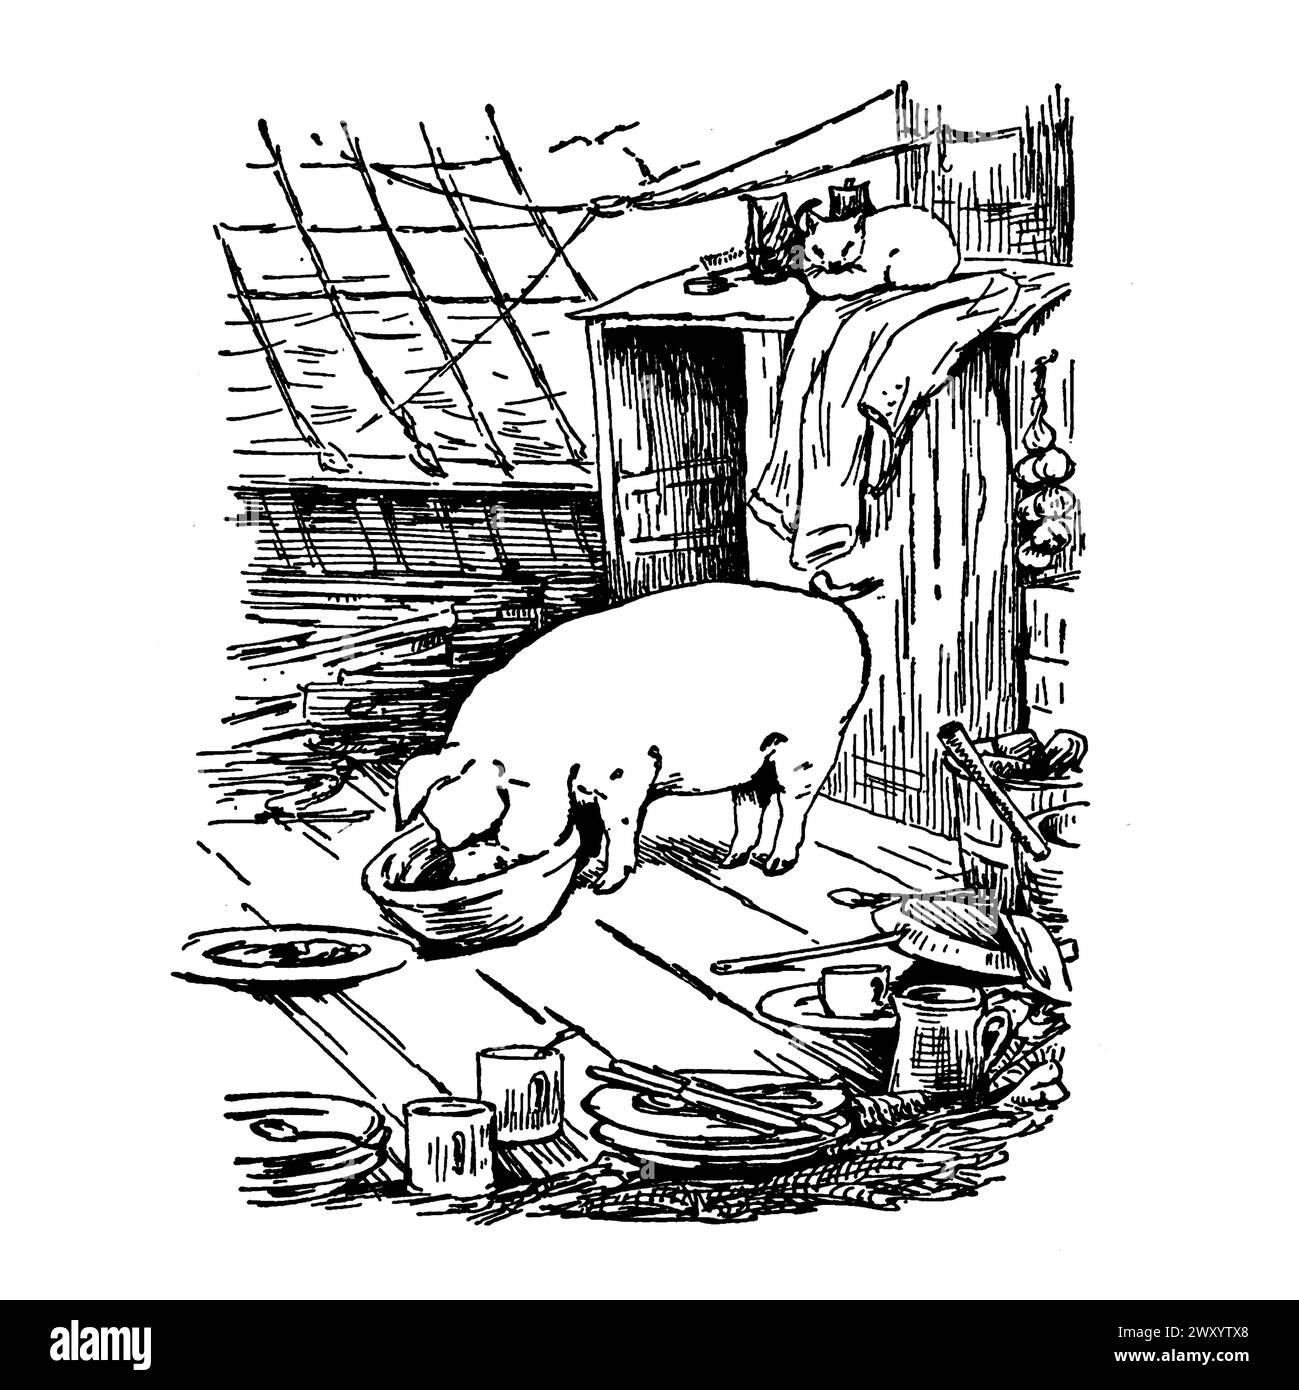 The tale of little Pig Robinson by Potter, Beatrix 1866-1943 Publication date 1920 Stock Photo